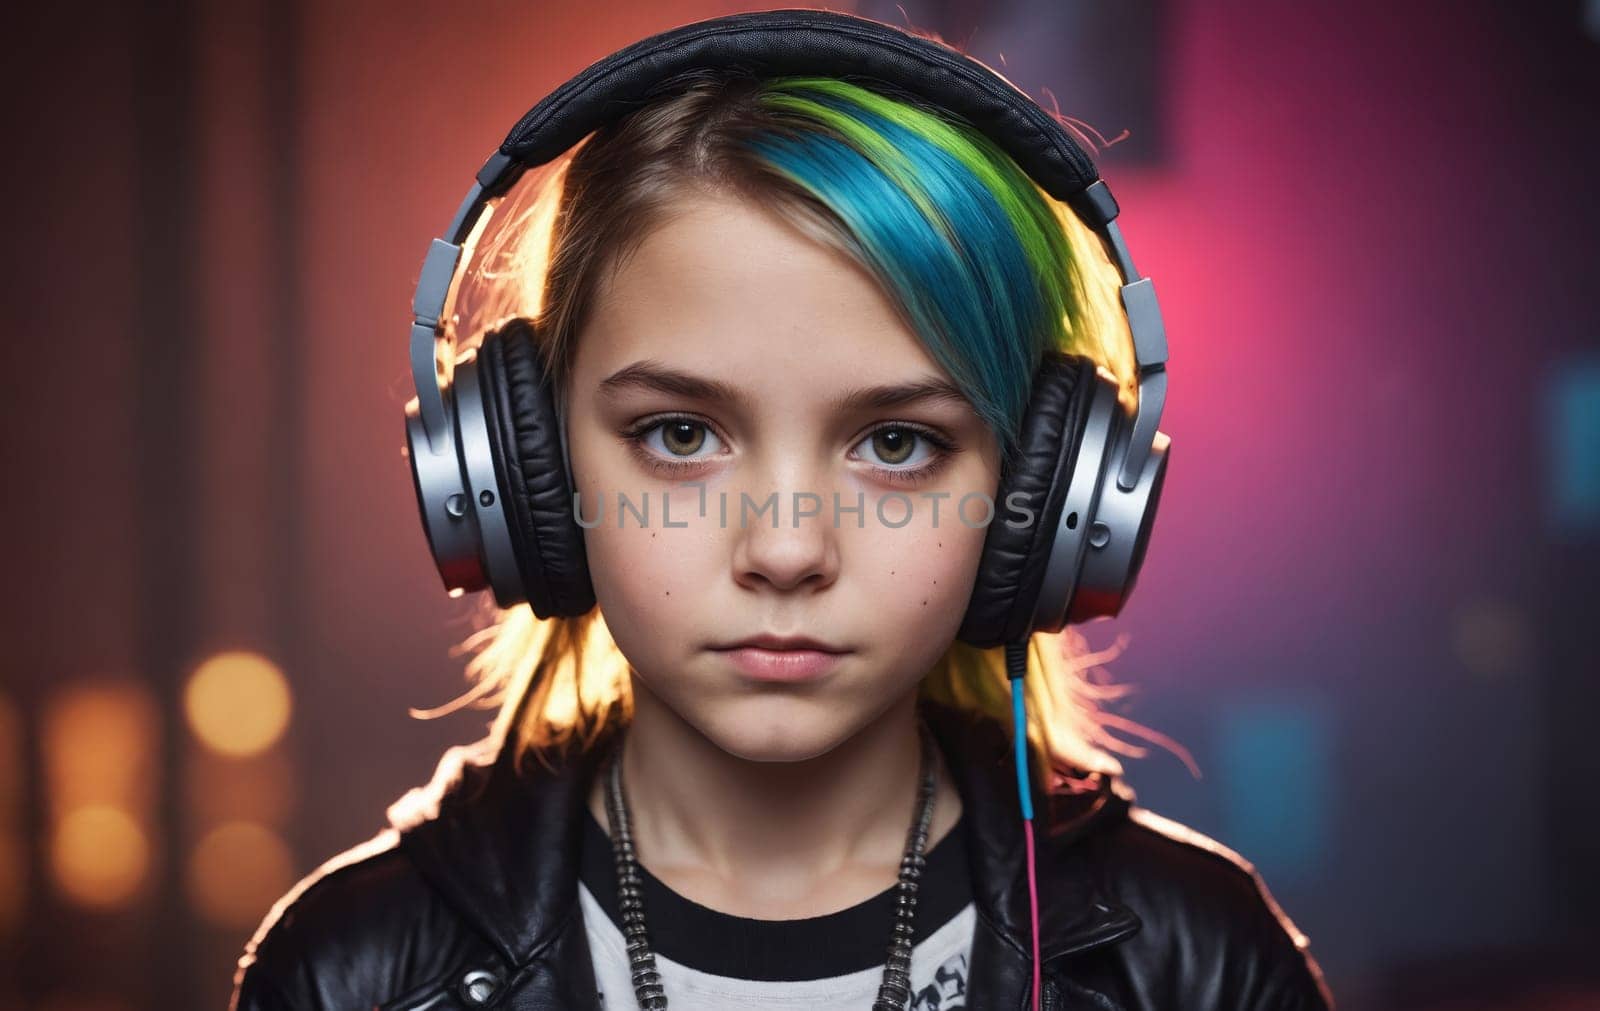 A cool girl with violet hair is listening to audio equipment by Andre1ns